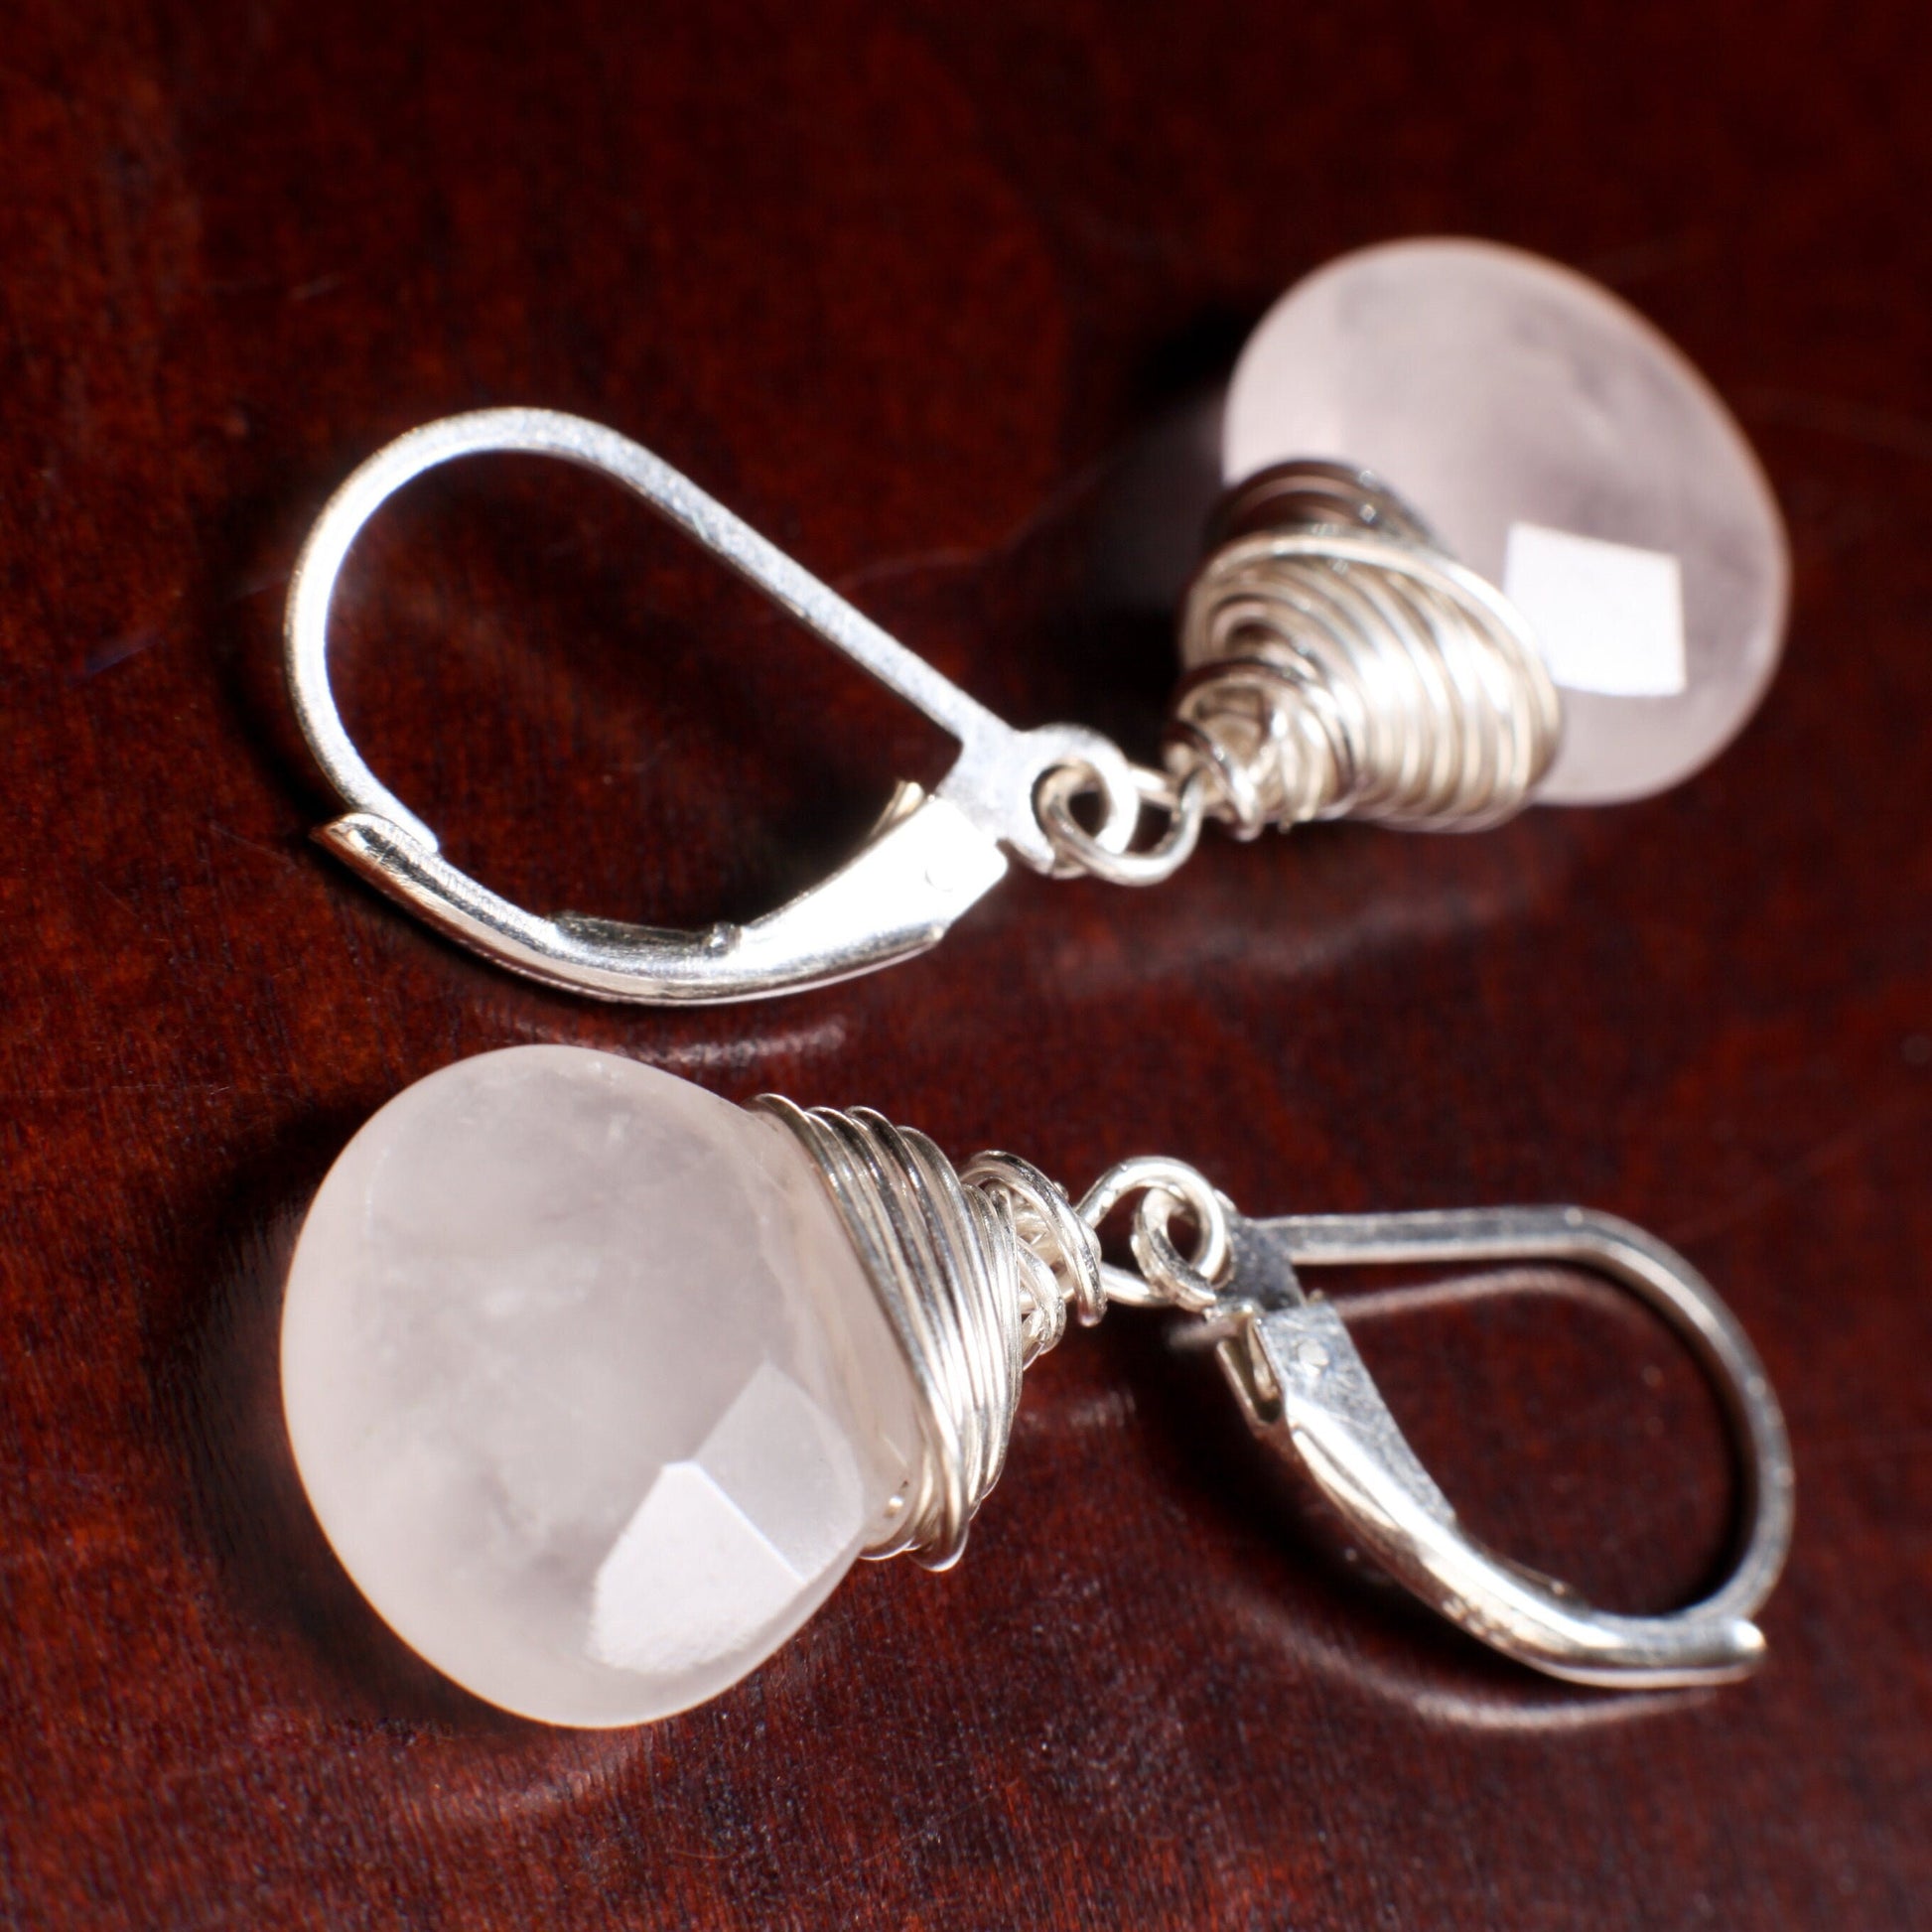 Natural Madagascar Rose Quartz Faceted Teardrop Wire Wrapped Rose Quartz 12mm Drop in Sterling Silver Leverback or Earwire